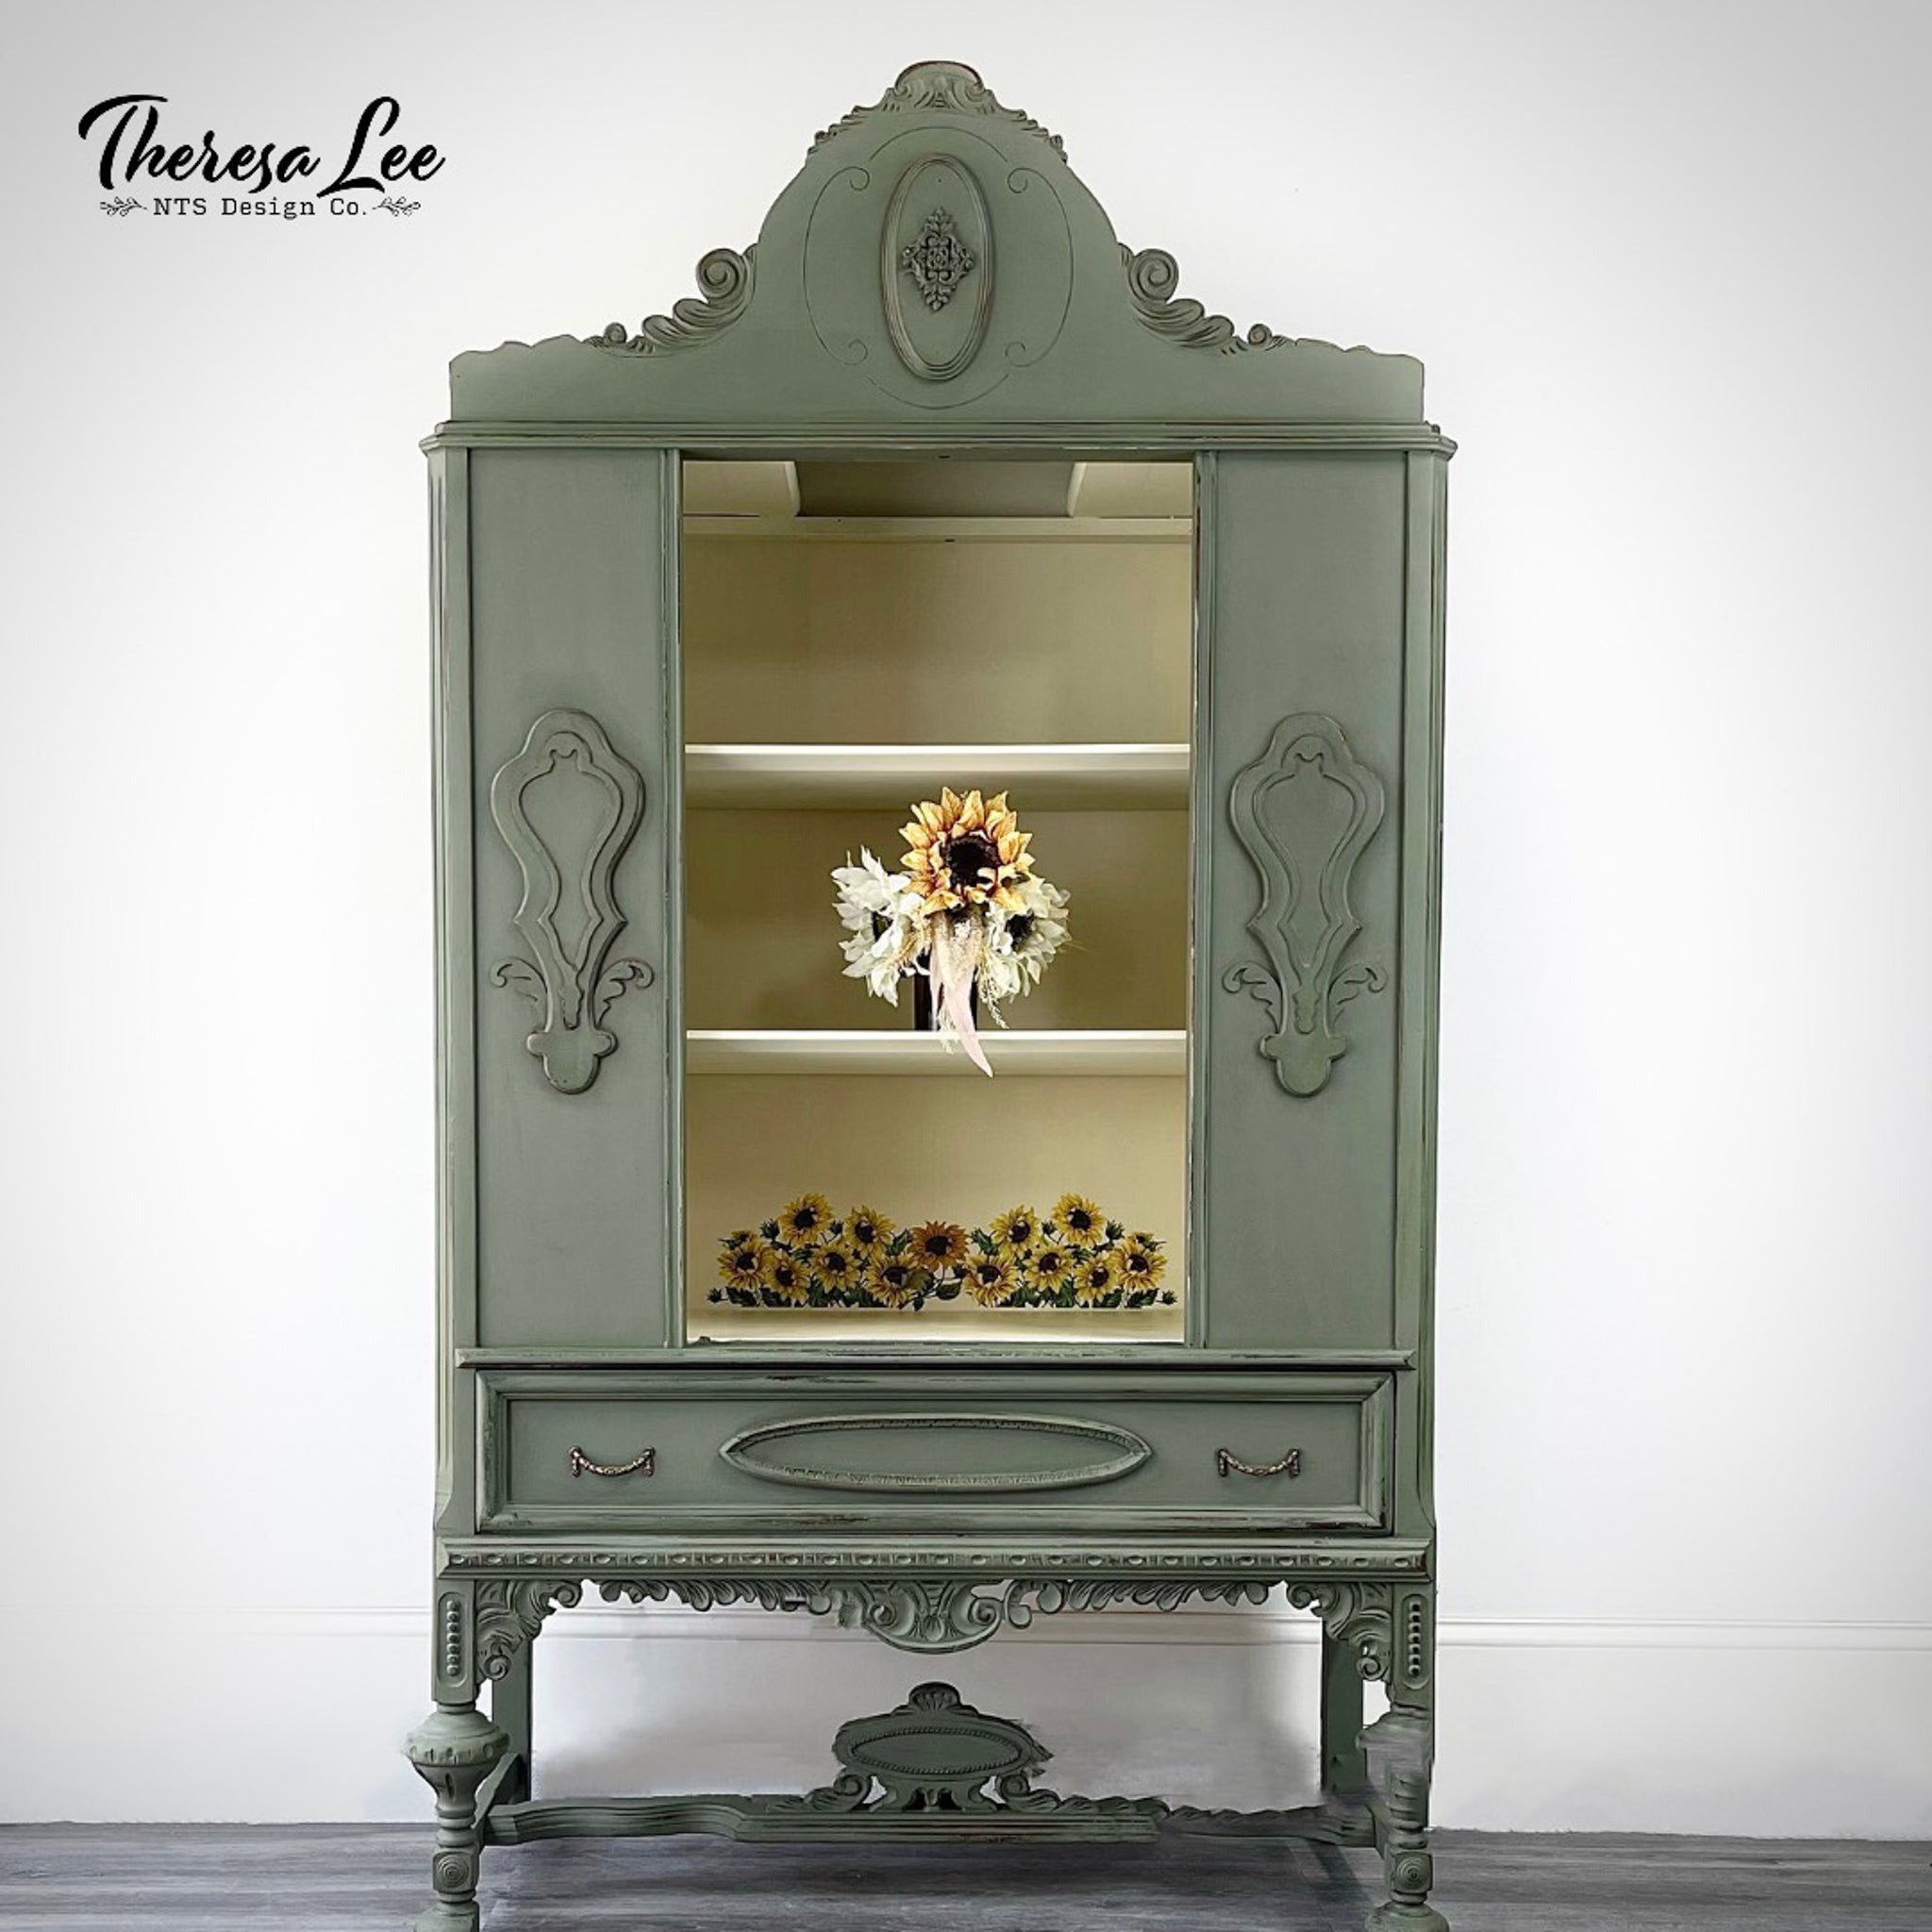 A vintage armoir refurbished by Theresa Lee NTS Design Company is painted sage green. Inside is painted cream and features the Sunflower Transfer on its backboard at the bottom.